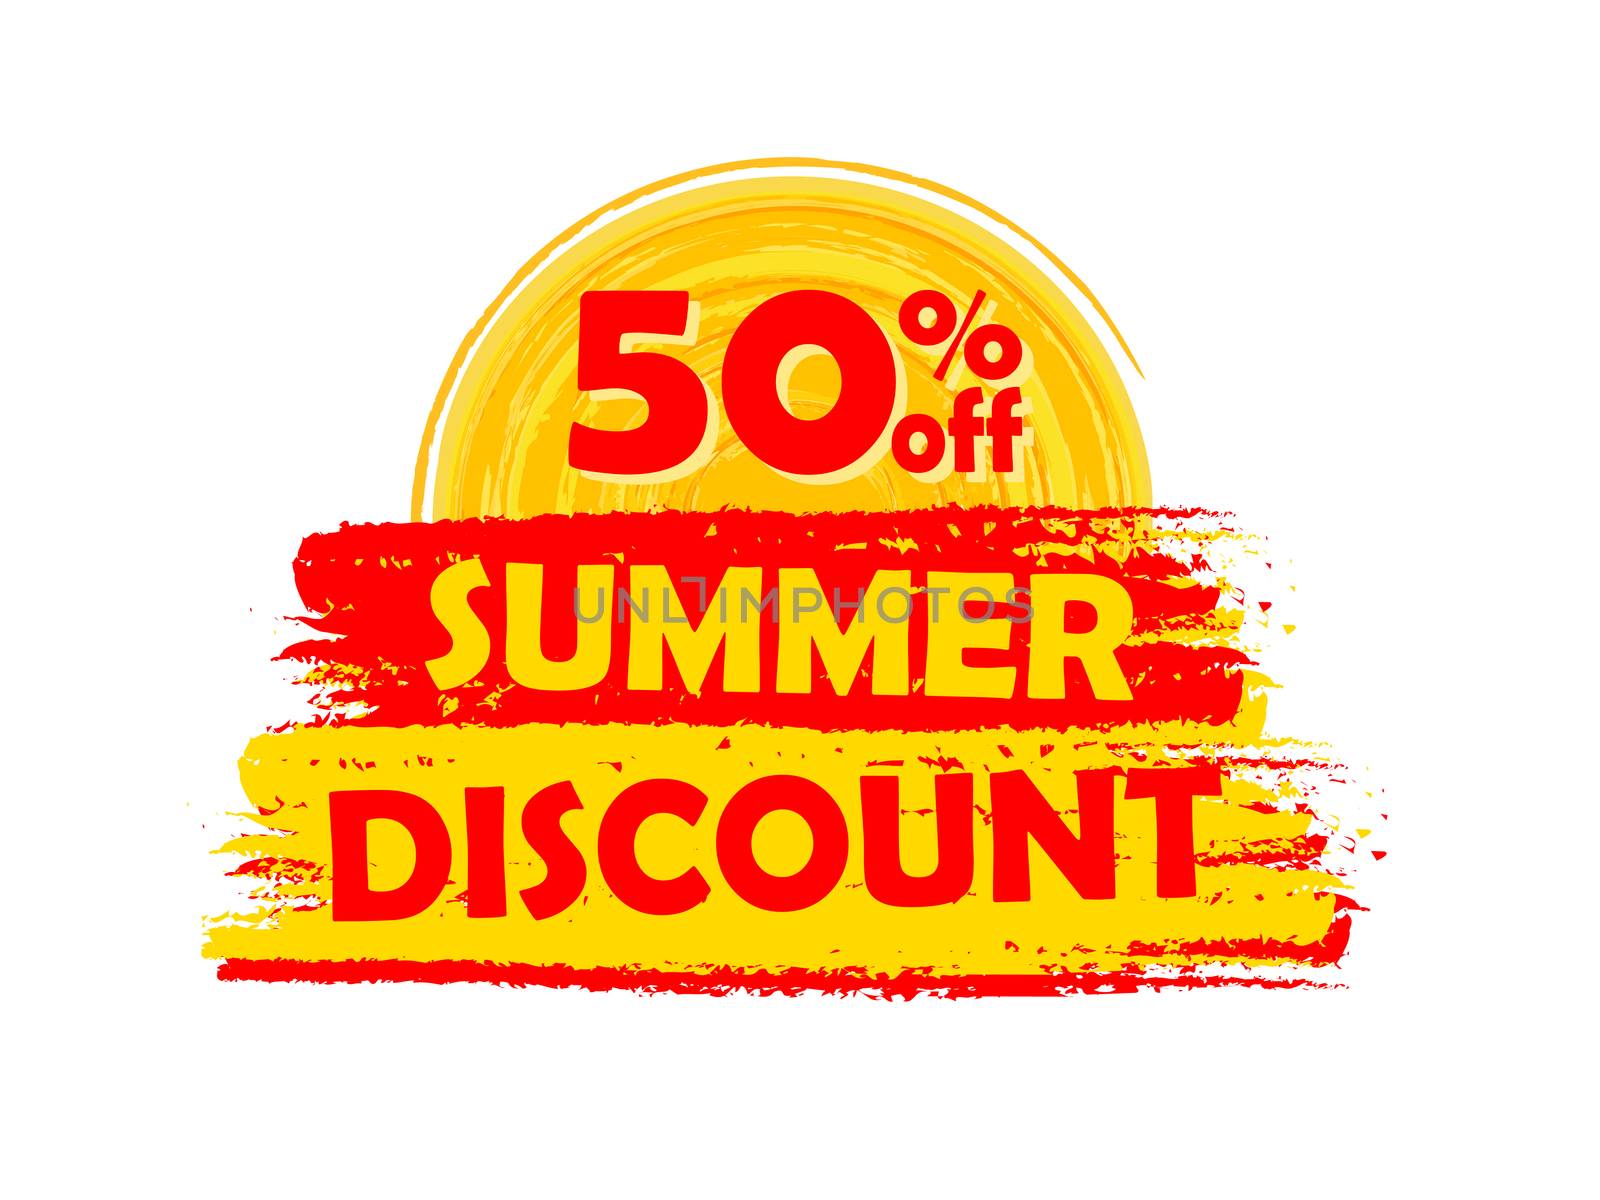 50 percentages off summer discount with sun sign, drawn label by marinini